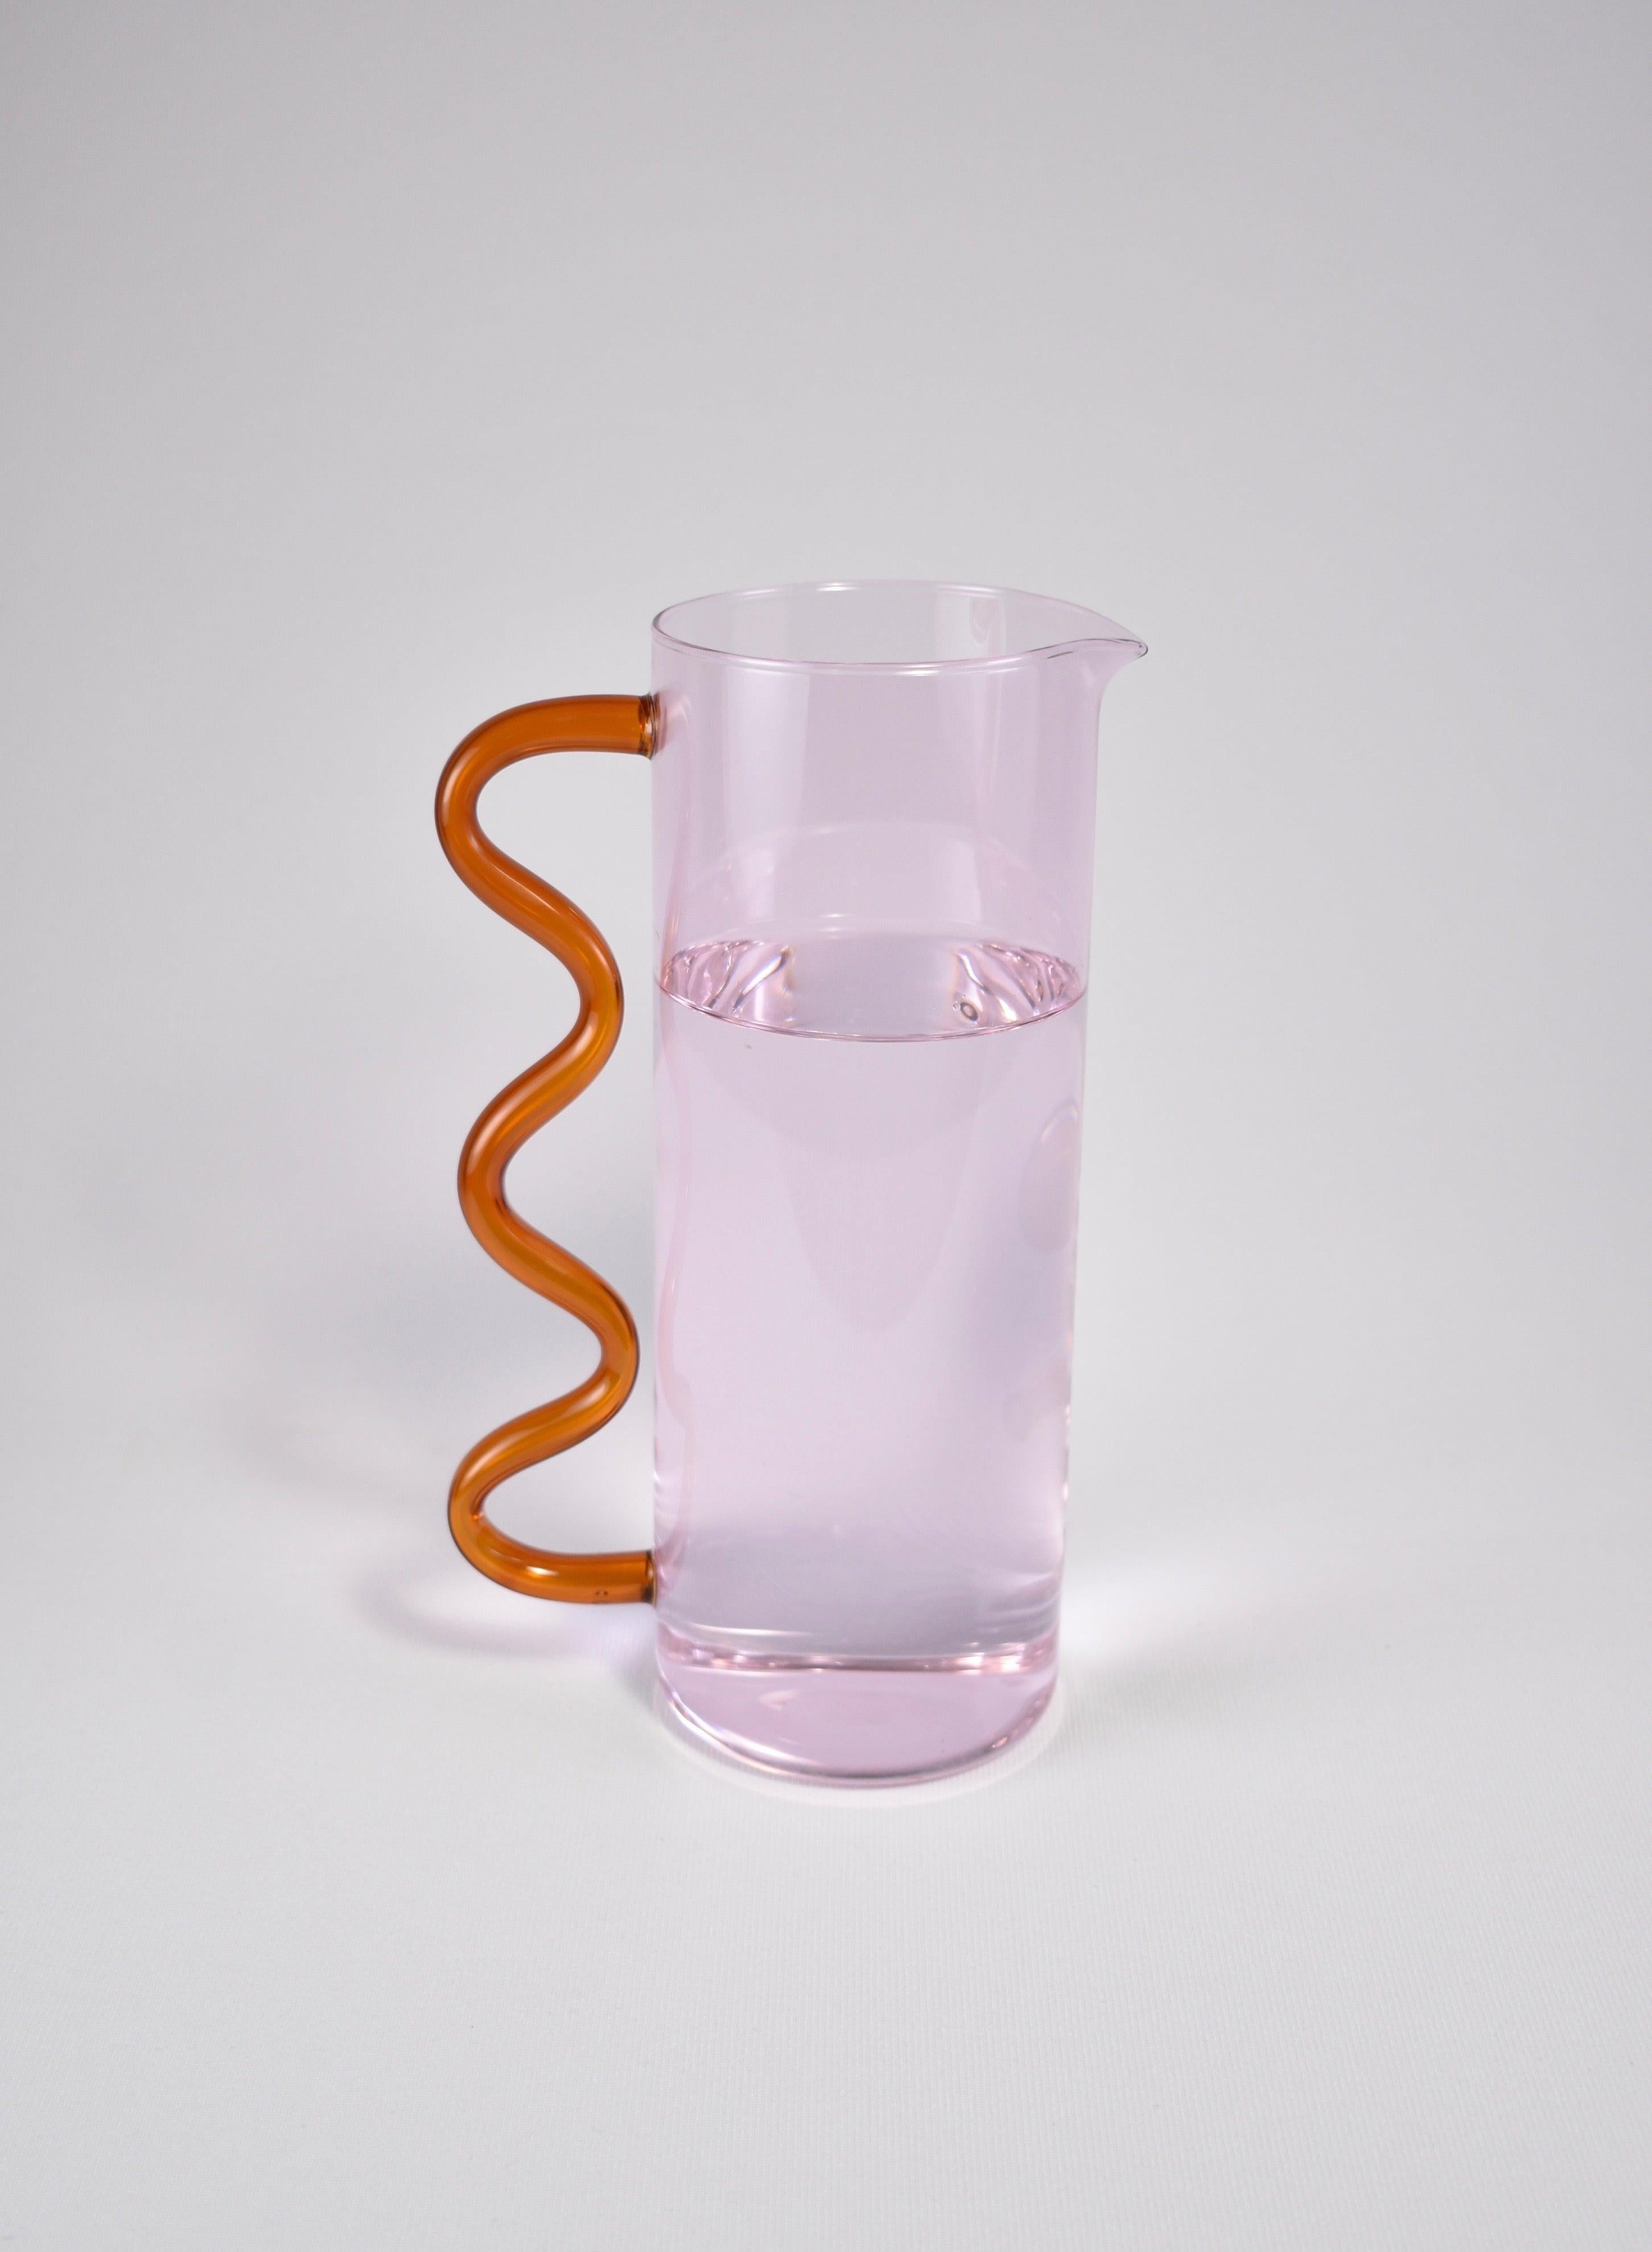 A glass pitcher in pink with an amber wavy handle. May be used for holding flowers, watering plants, a pitcher for juice or any other use you can think of. Designed by Sophie Lou Jacobsen in New York.

Made of lightweight and durable borosilicate